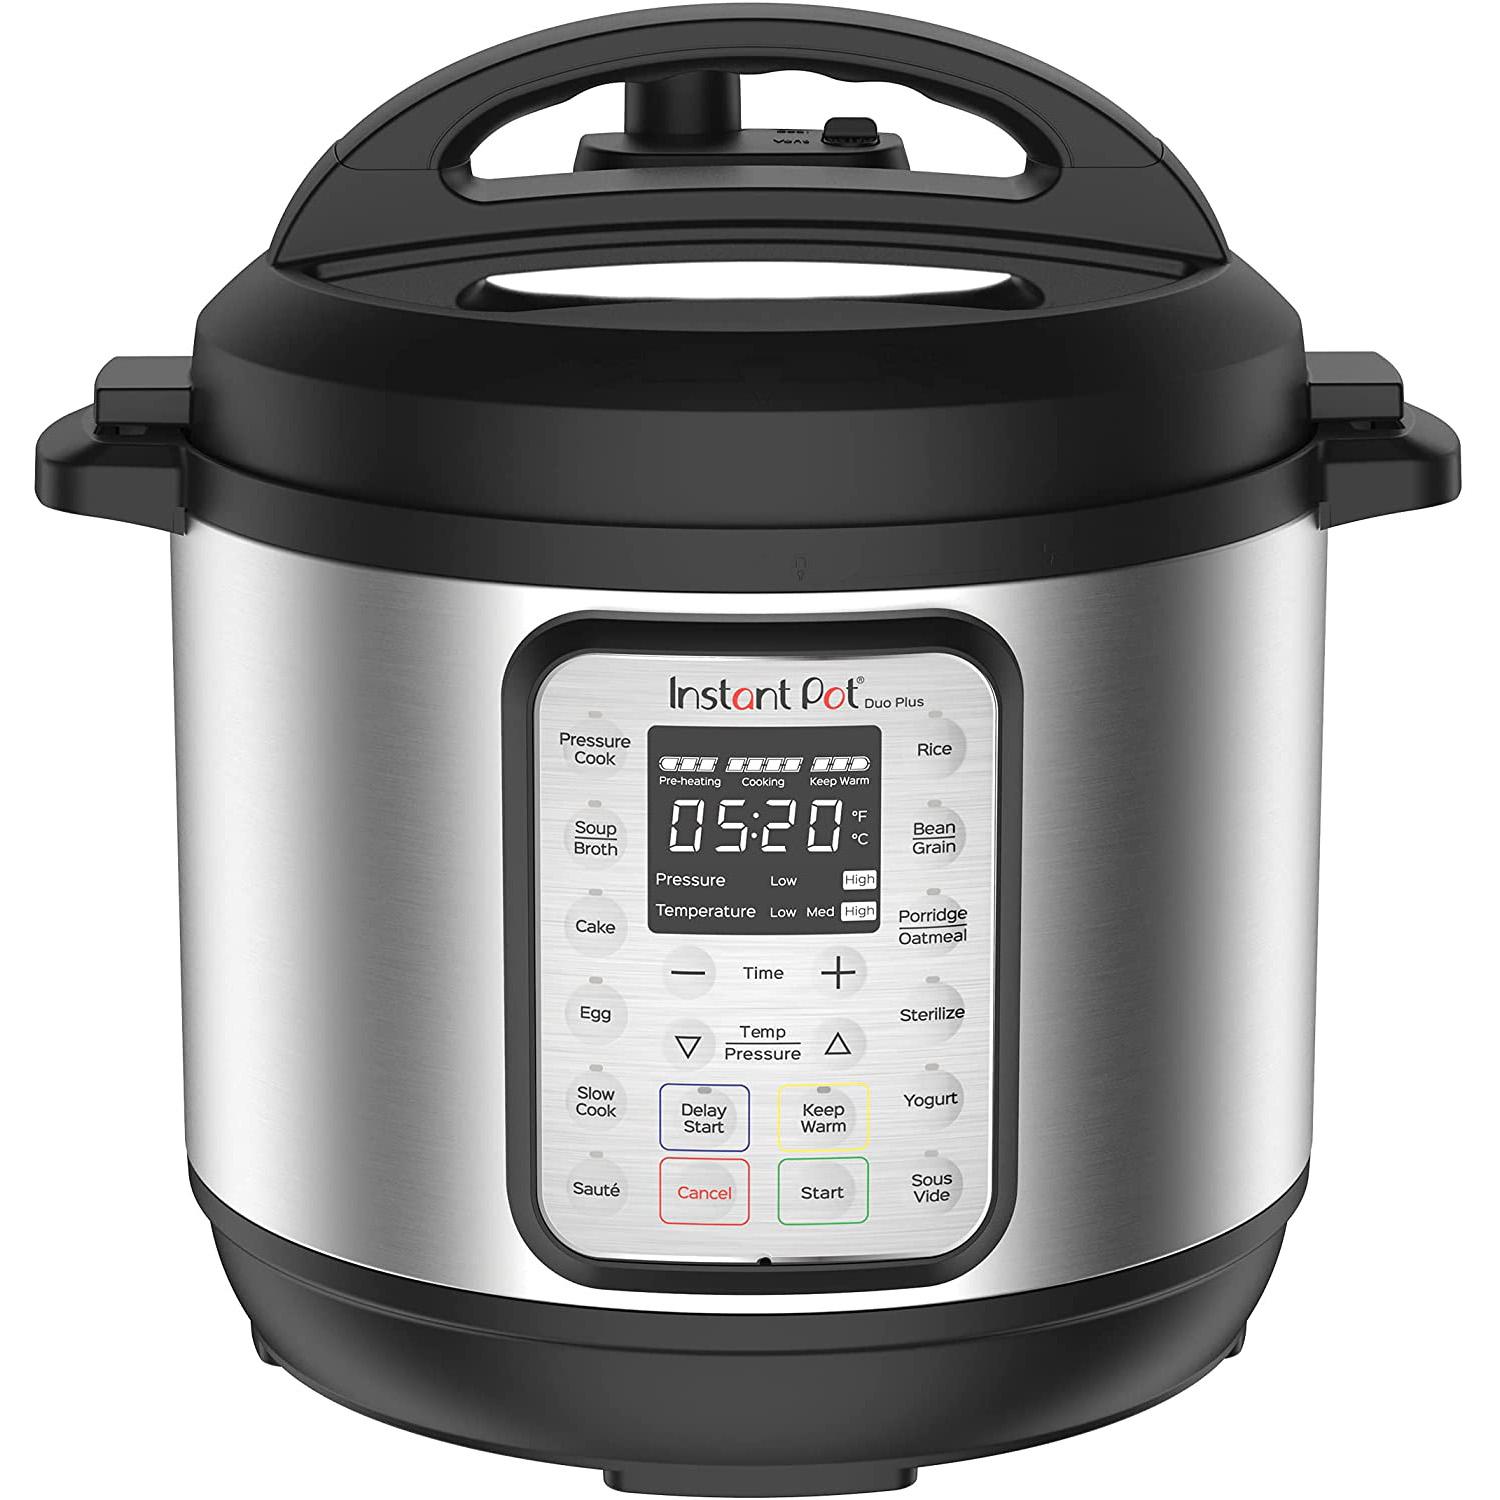 Instant Pot Duo Plus 6Q 9-in-1 Pressure Cooker for $79.95 Shipped